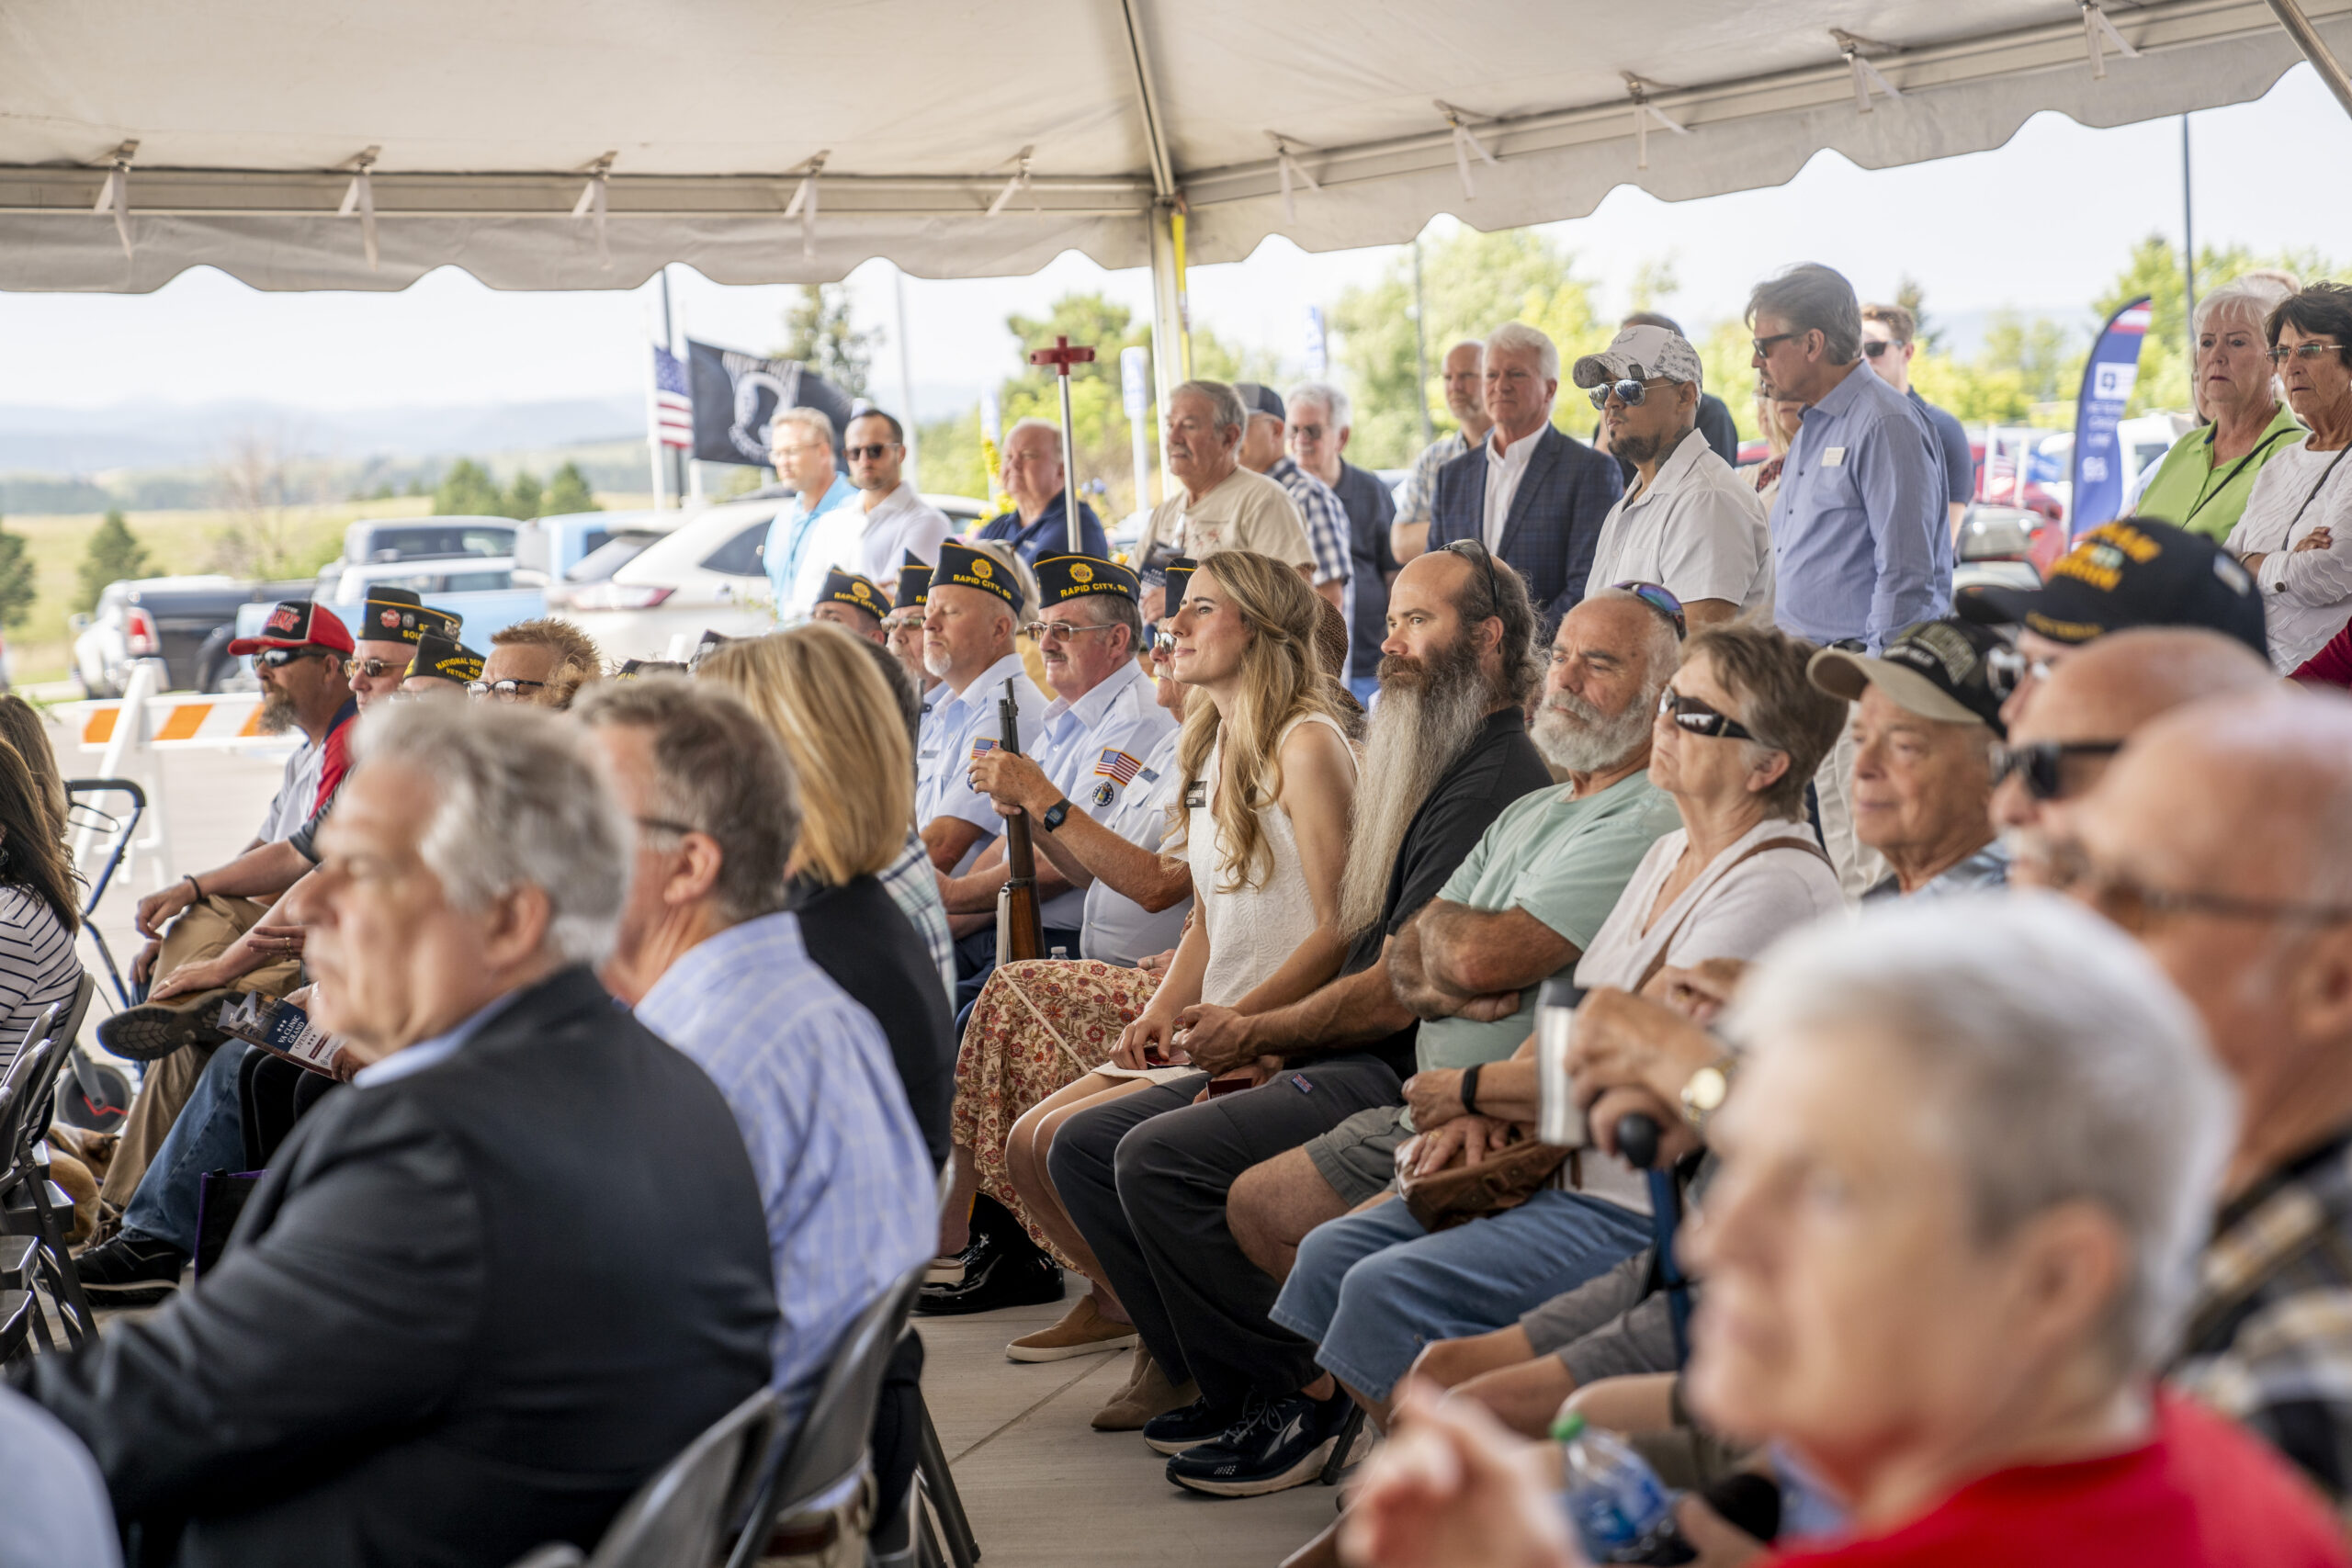 Large crowd gathers for VA Clinic grand opening in Rapid City South Dakota